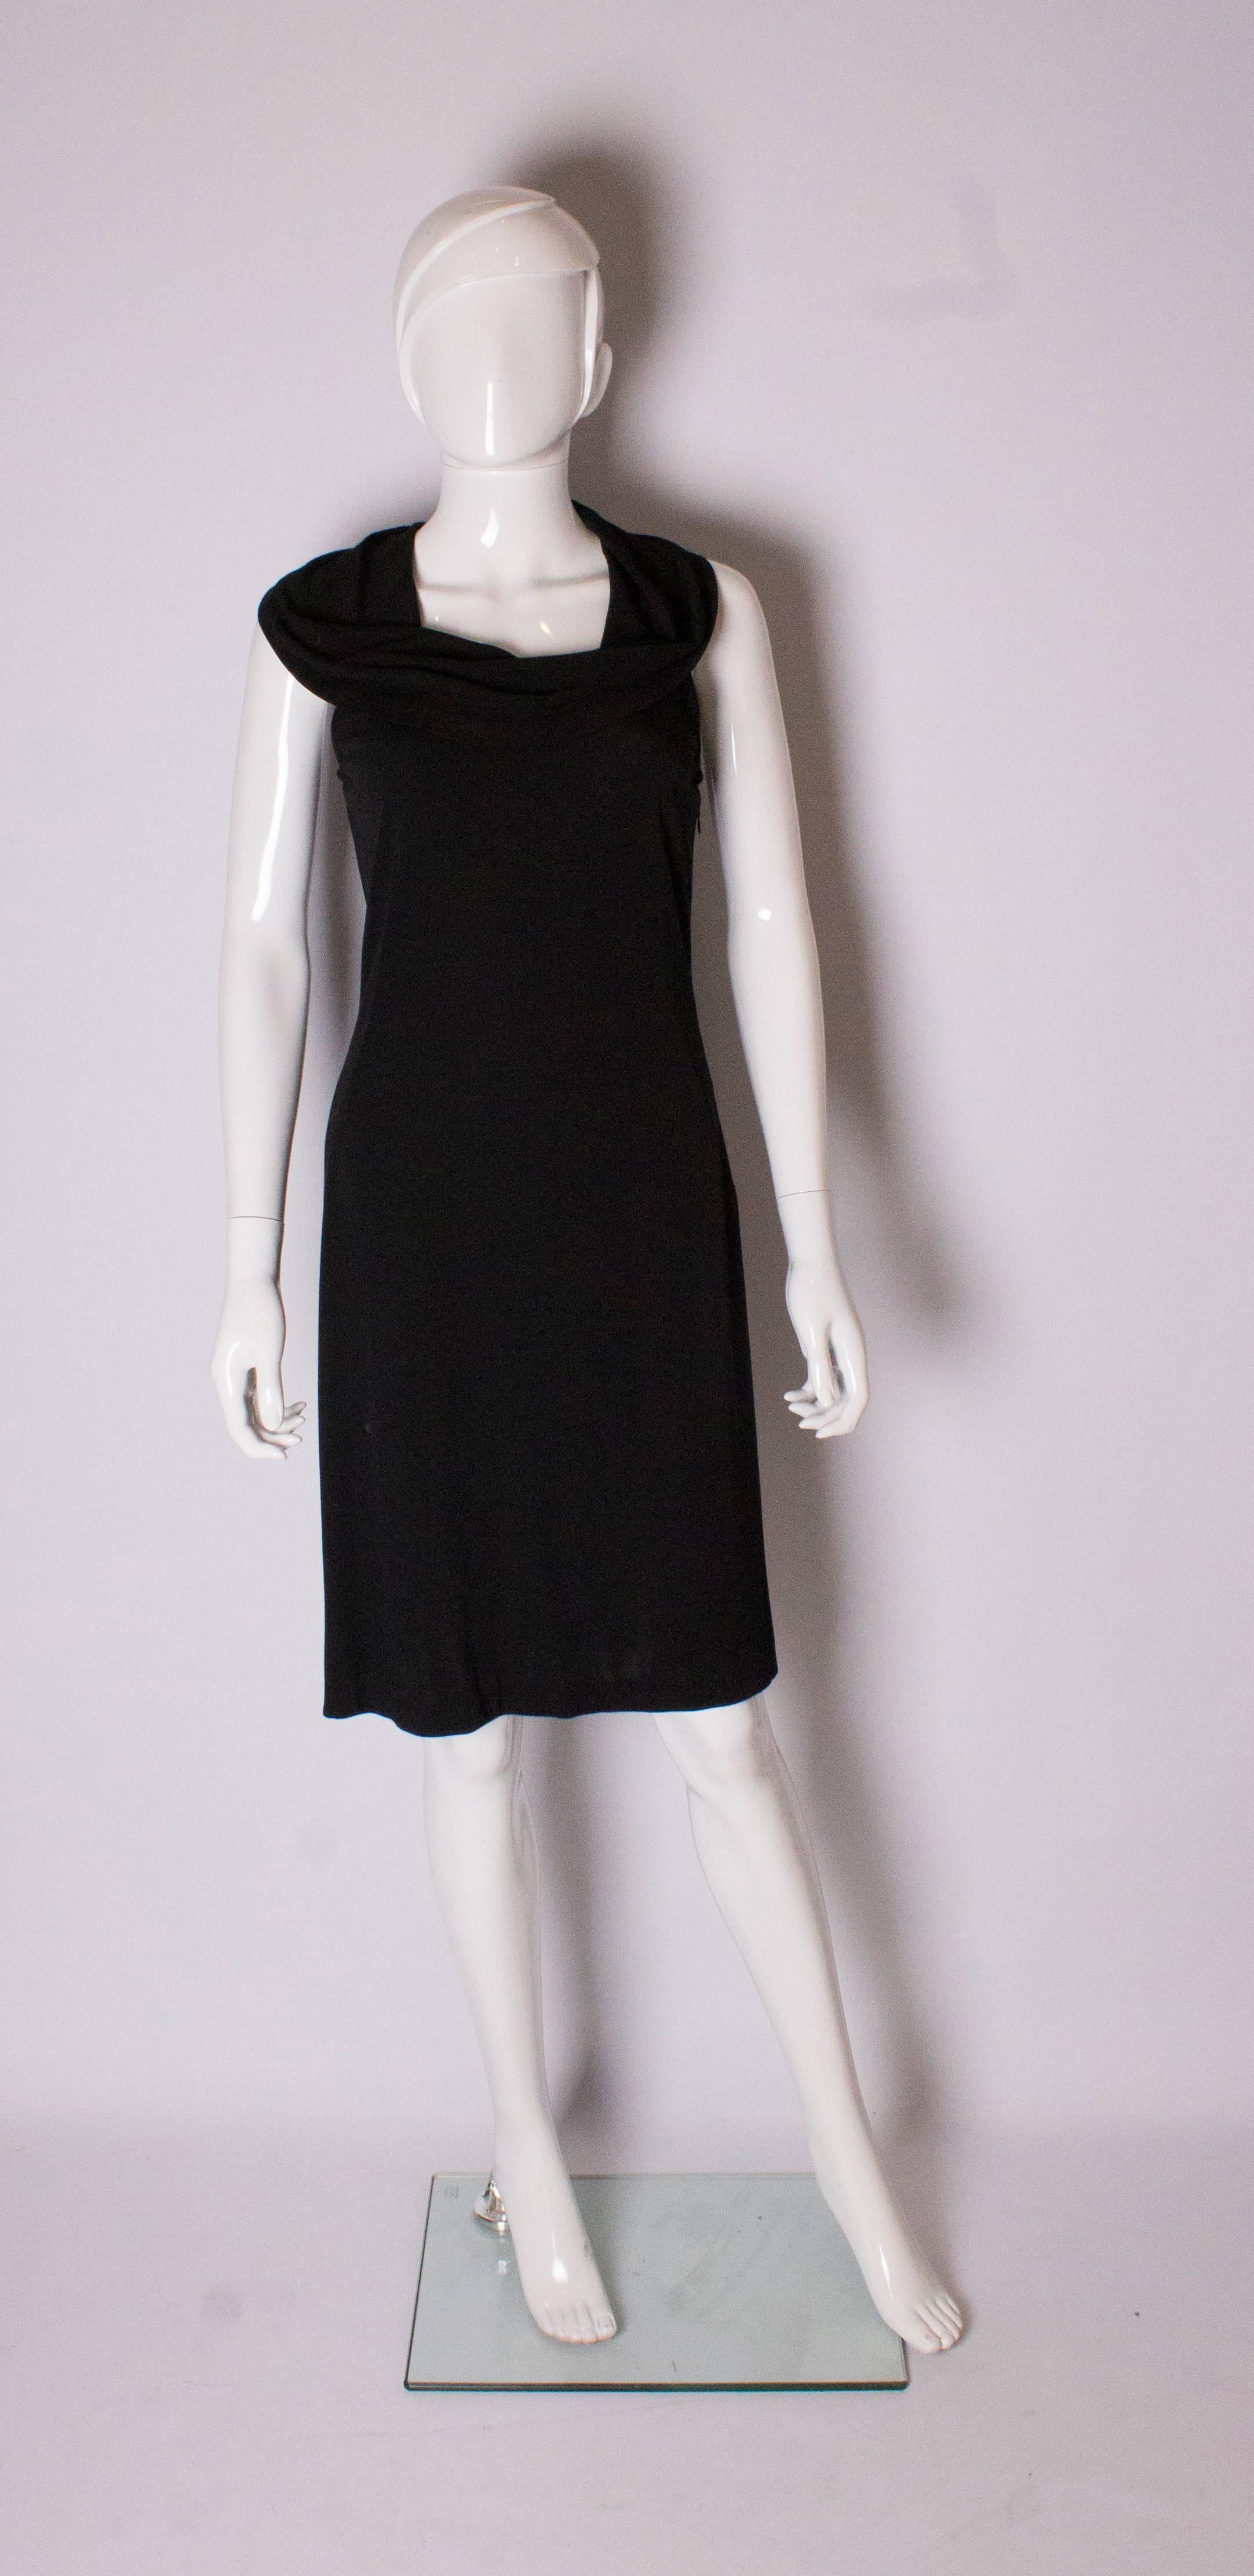 A chic vintage cocktail dress by Oscar de la Renta. The dress is sleaveless has a deep cowl neck and a side zip.